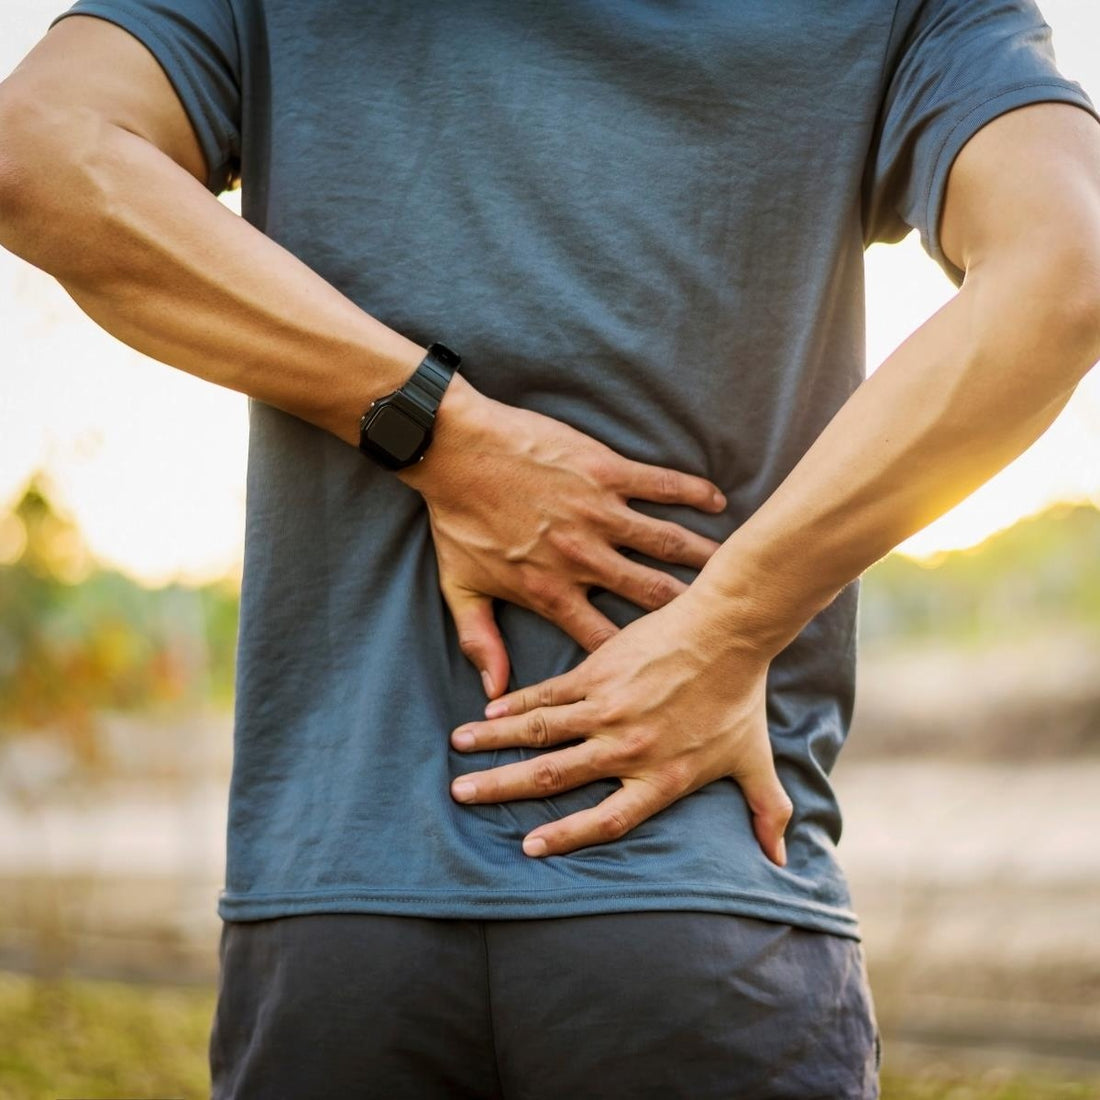 Tips To Reduce Back Pain